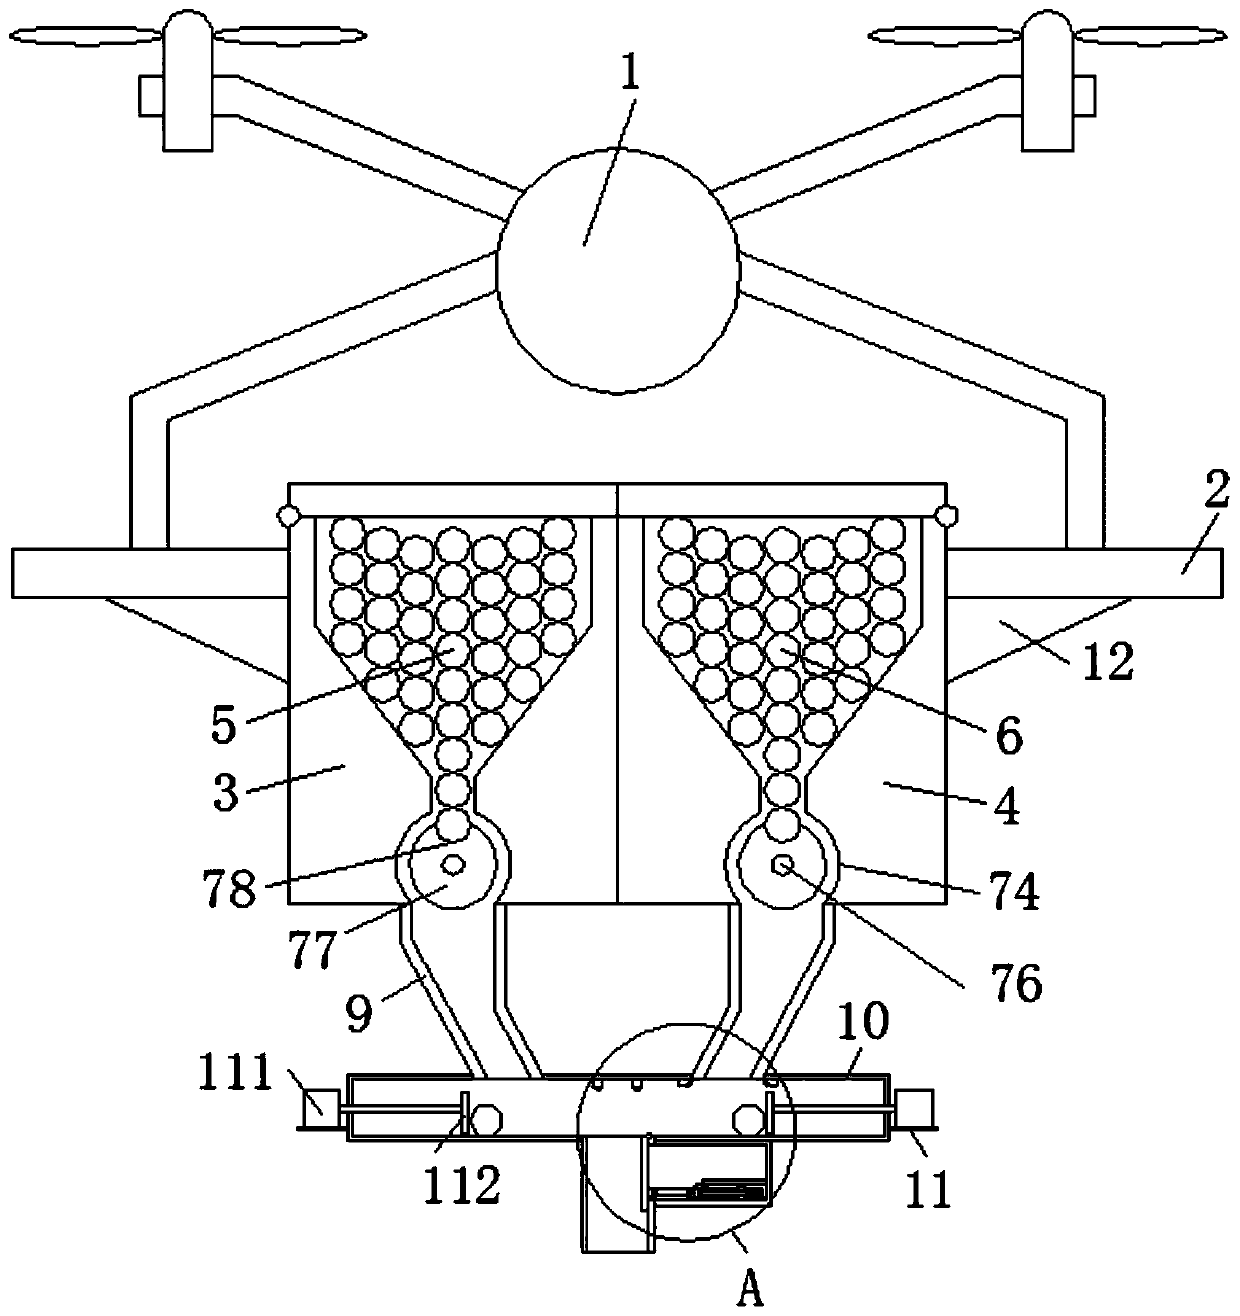 Seeding device used for agricultural unmanned aerial vehicle